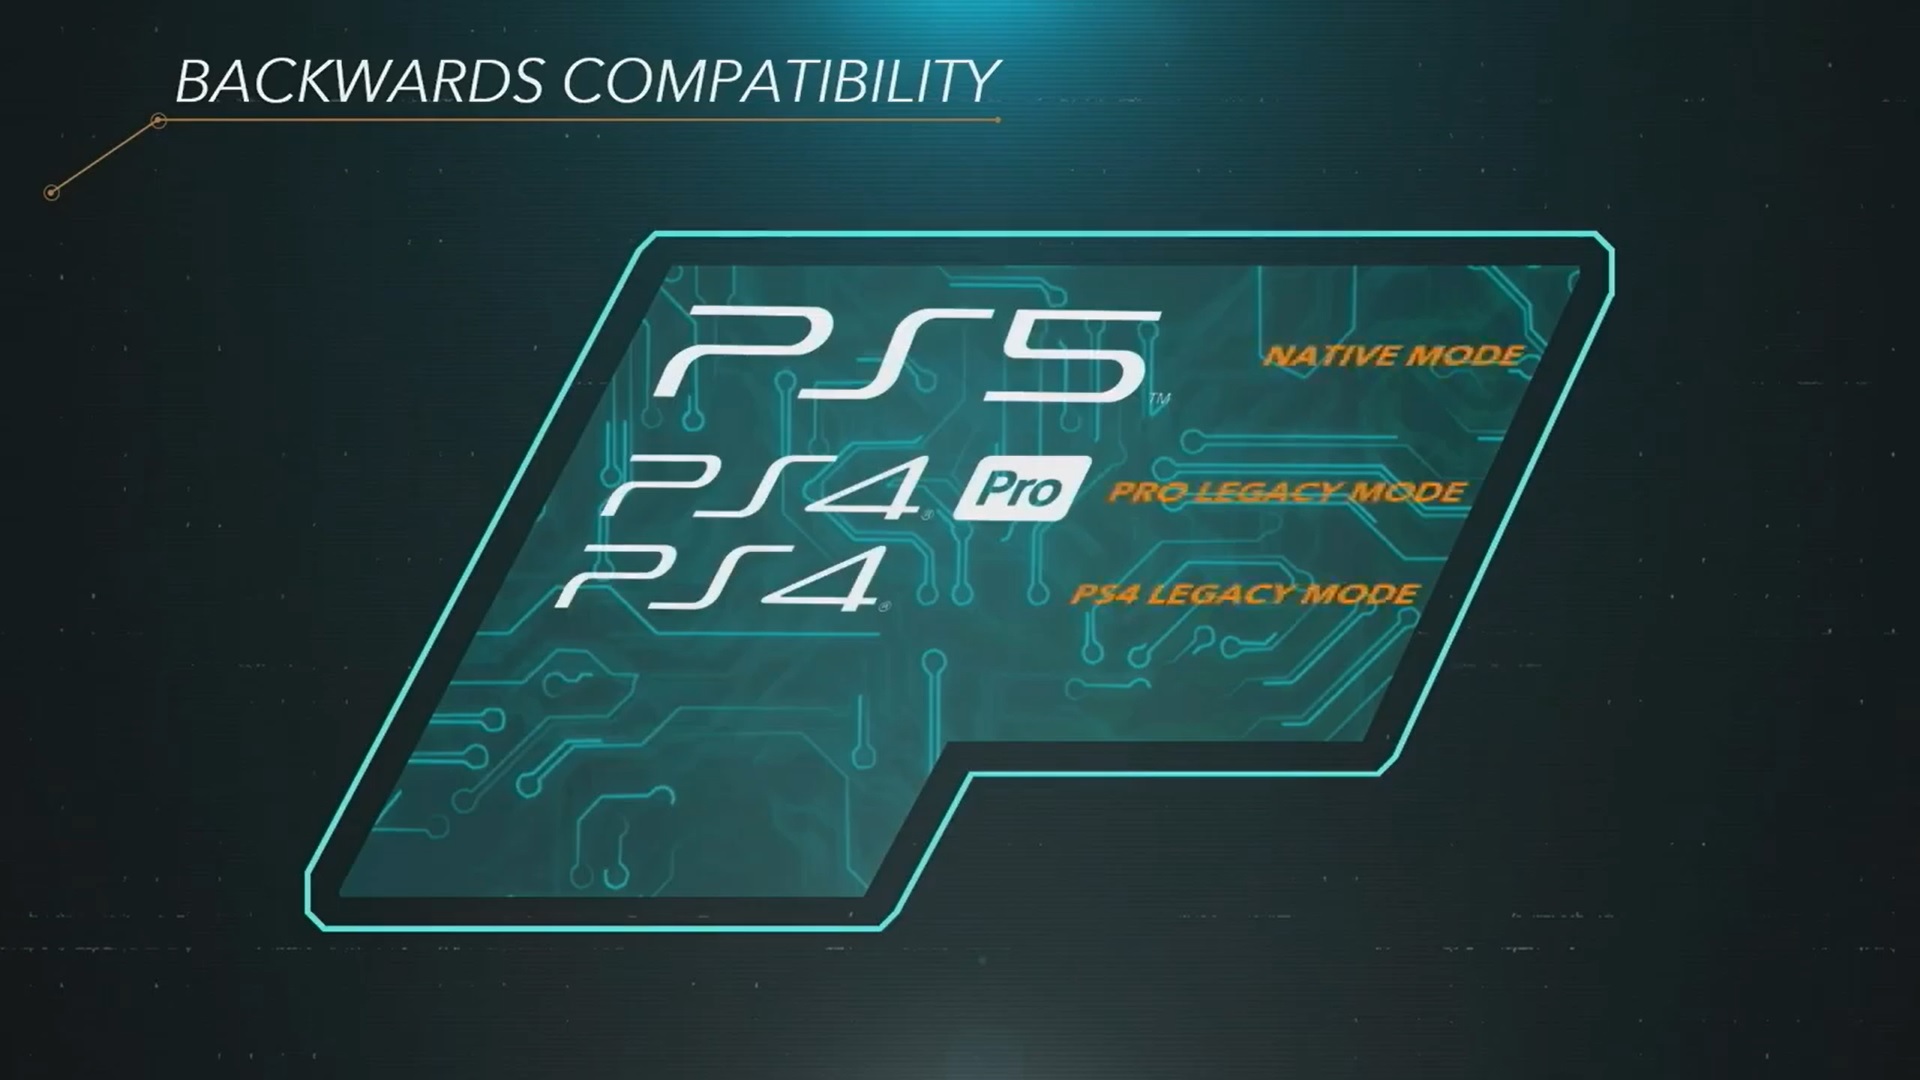 what is the release date of the ps5